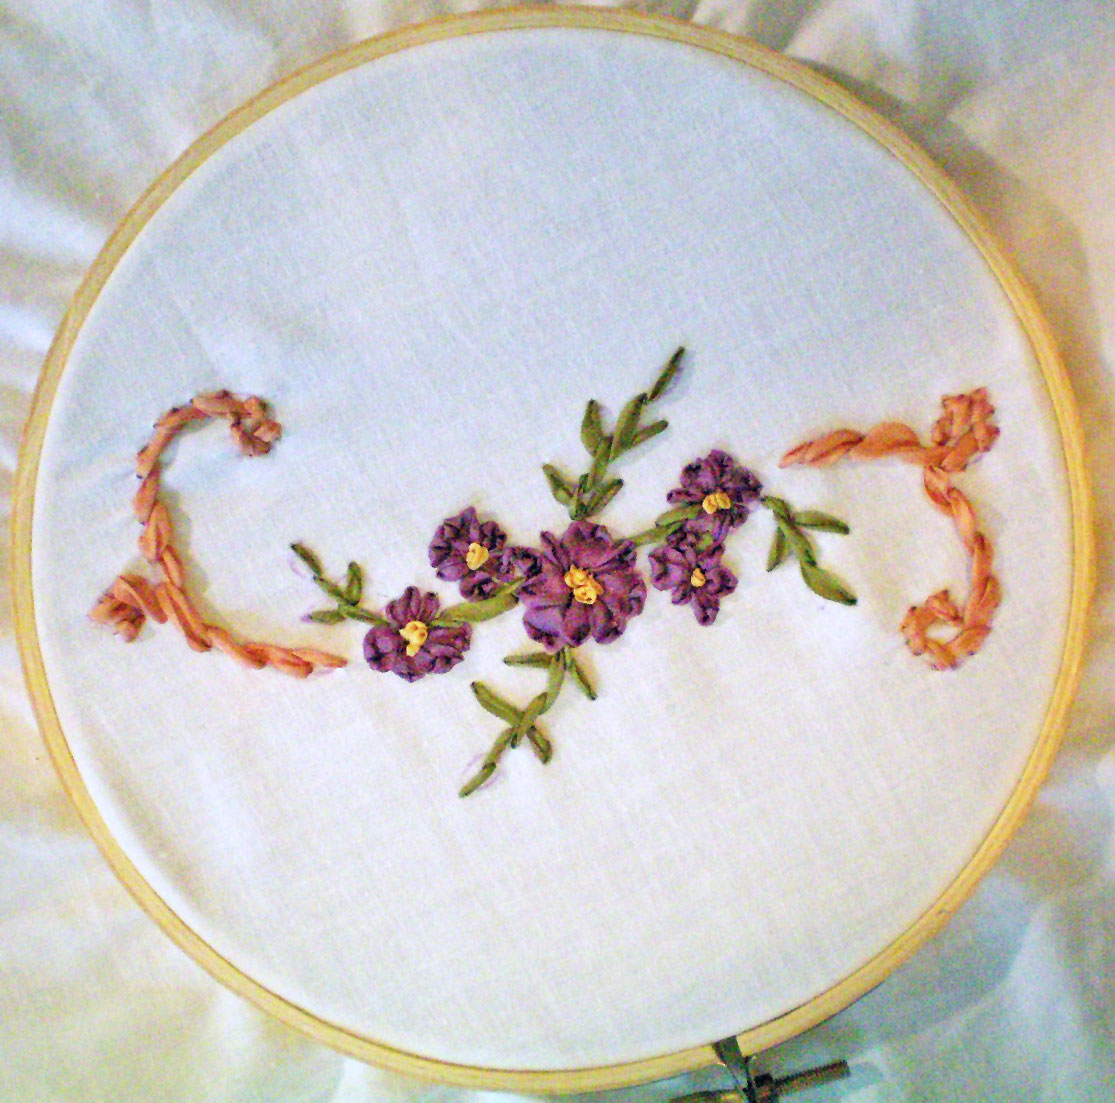 Silk Embroidery Patterns Free The Art Of Silk Ribbon Embroidery Part I Yesterdays Thimble